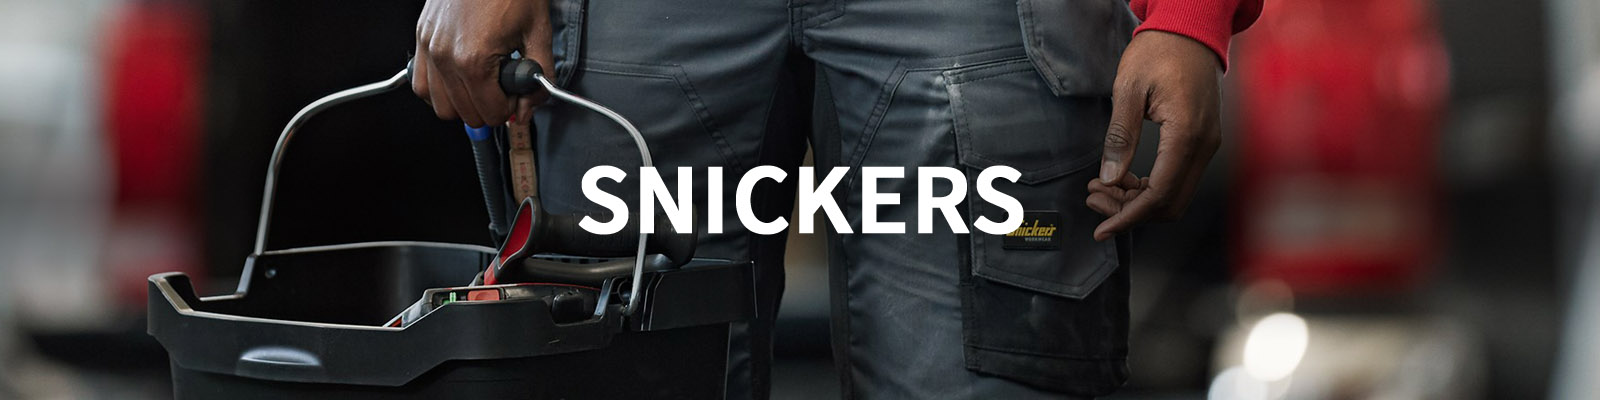 Snickers Trousers